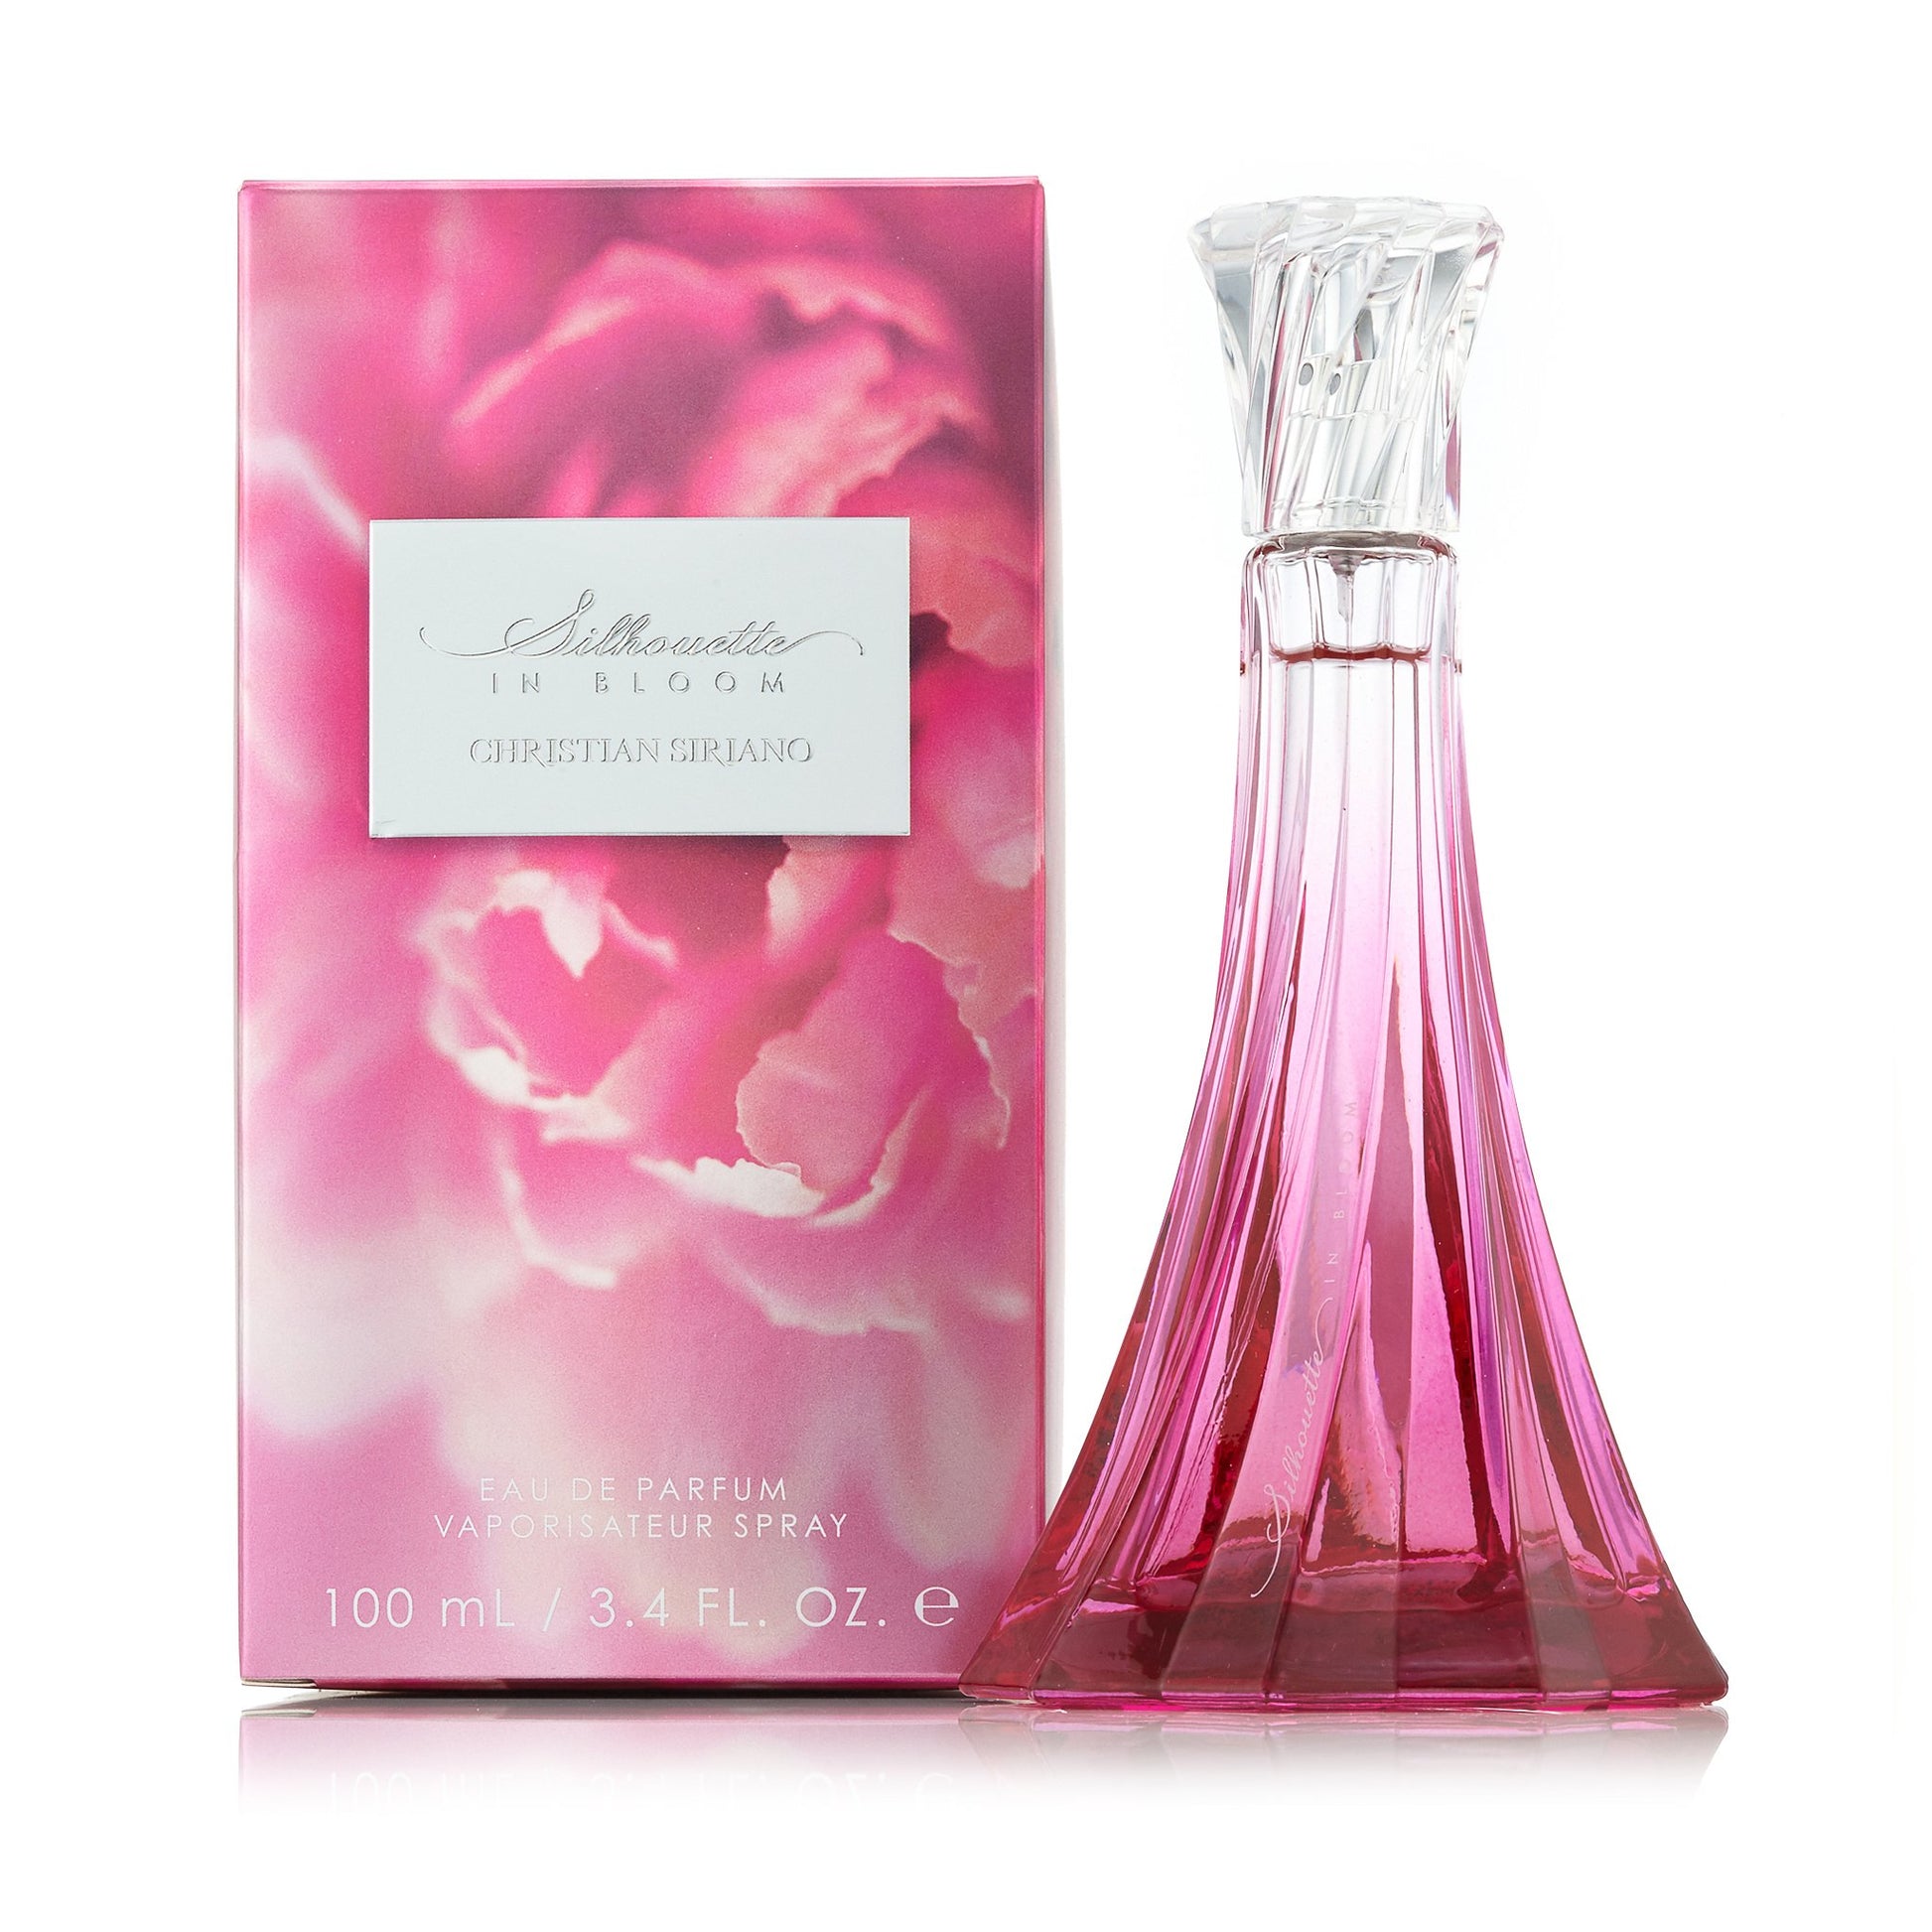 Silhouette in Bloom Eau de Parfum Spray for Women by Christian Siriano, Product image 2